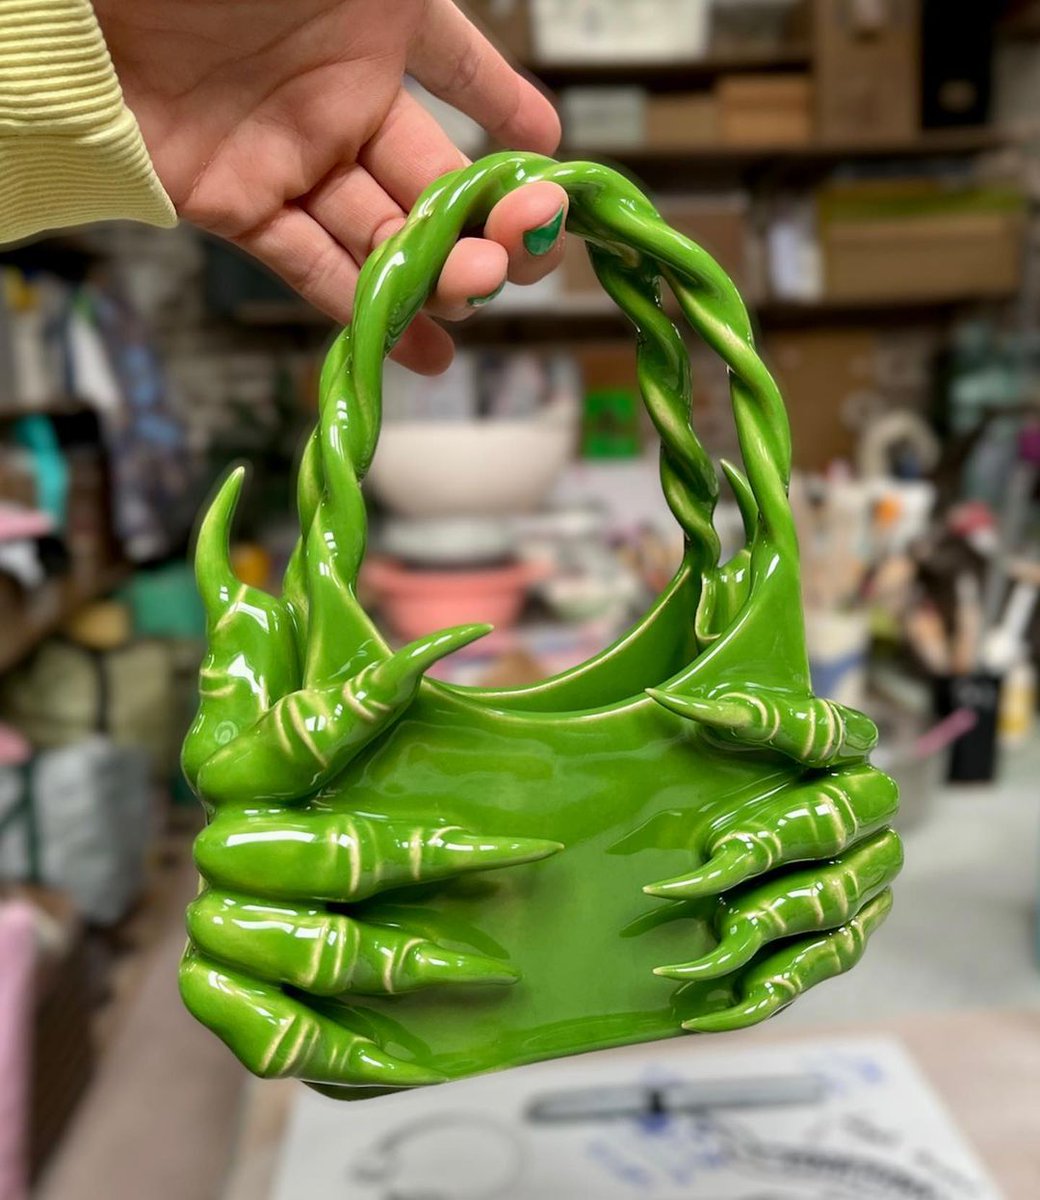 Above Pic 1: Medium Bag in sandstone ceramic enamel with matte metal effect.

Above Pic 2: Sandstone Ceramic Bag with 4 paws, shiny red enamel, and synthetic fur handle.

📸: @/andysimonstudio .

Below Pic: “My Little Green Monstrous Bag” from Fritto Misto exhibition at IRL.